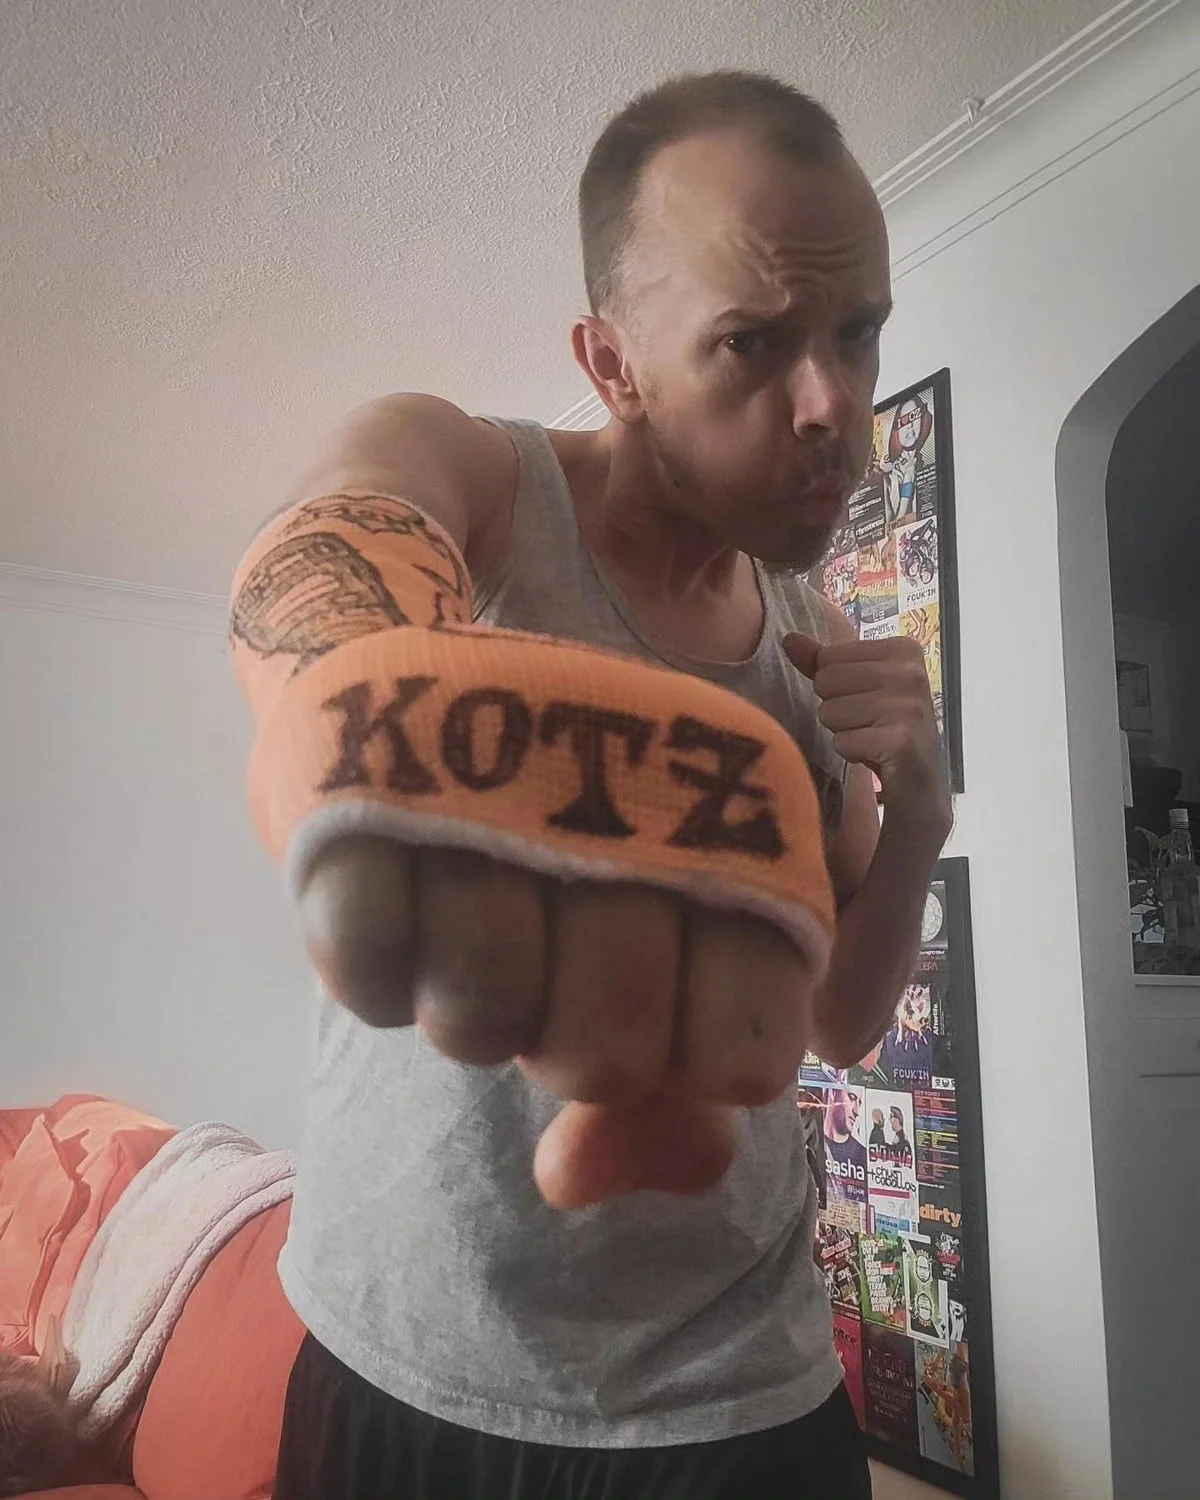 Close up shot of an orange cast over a hand with text reading "Kotz"